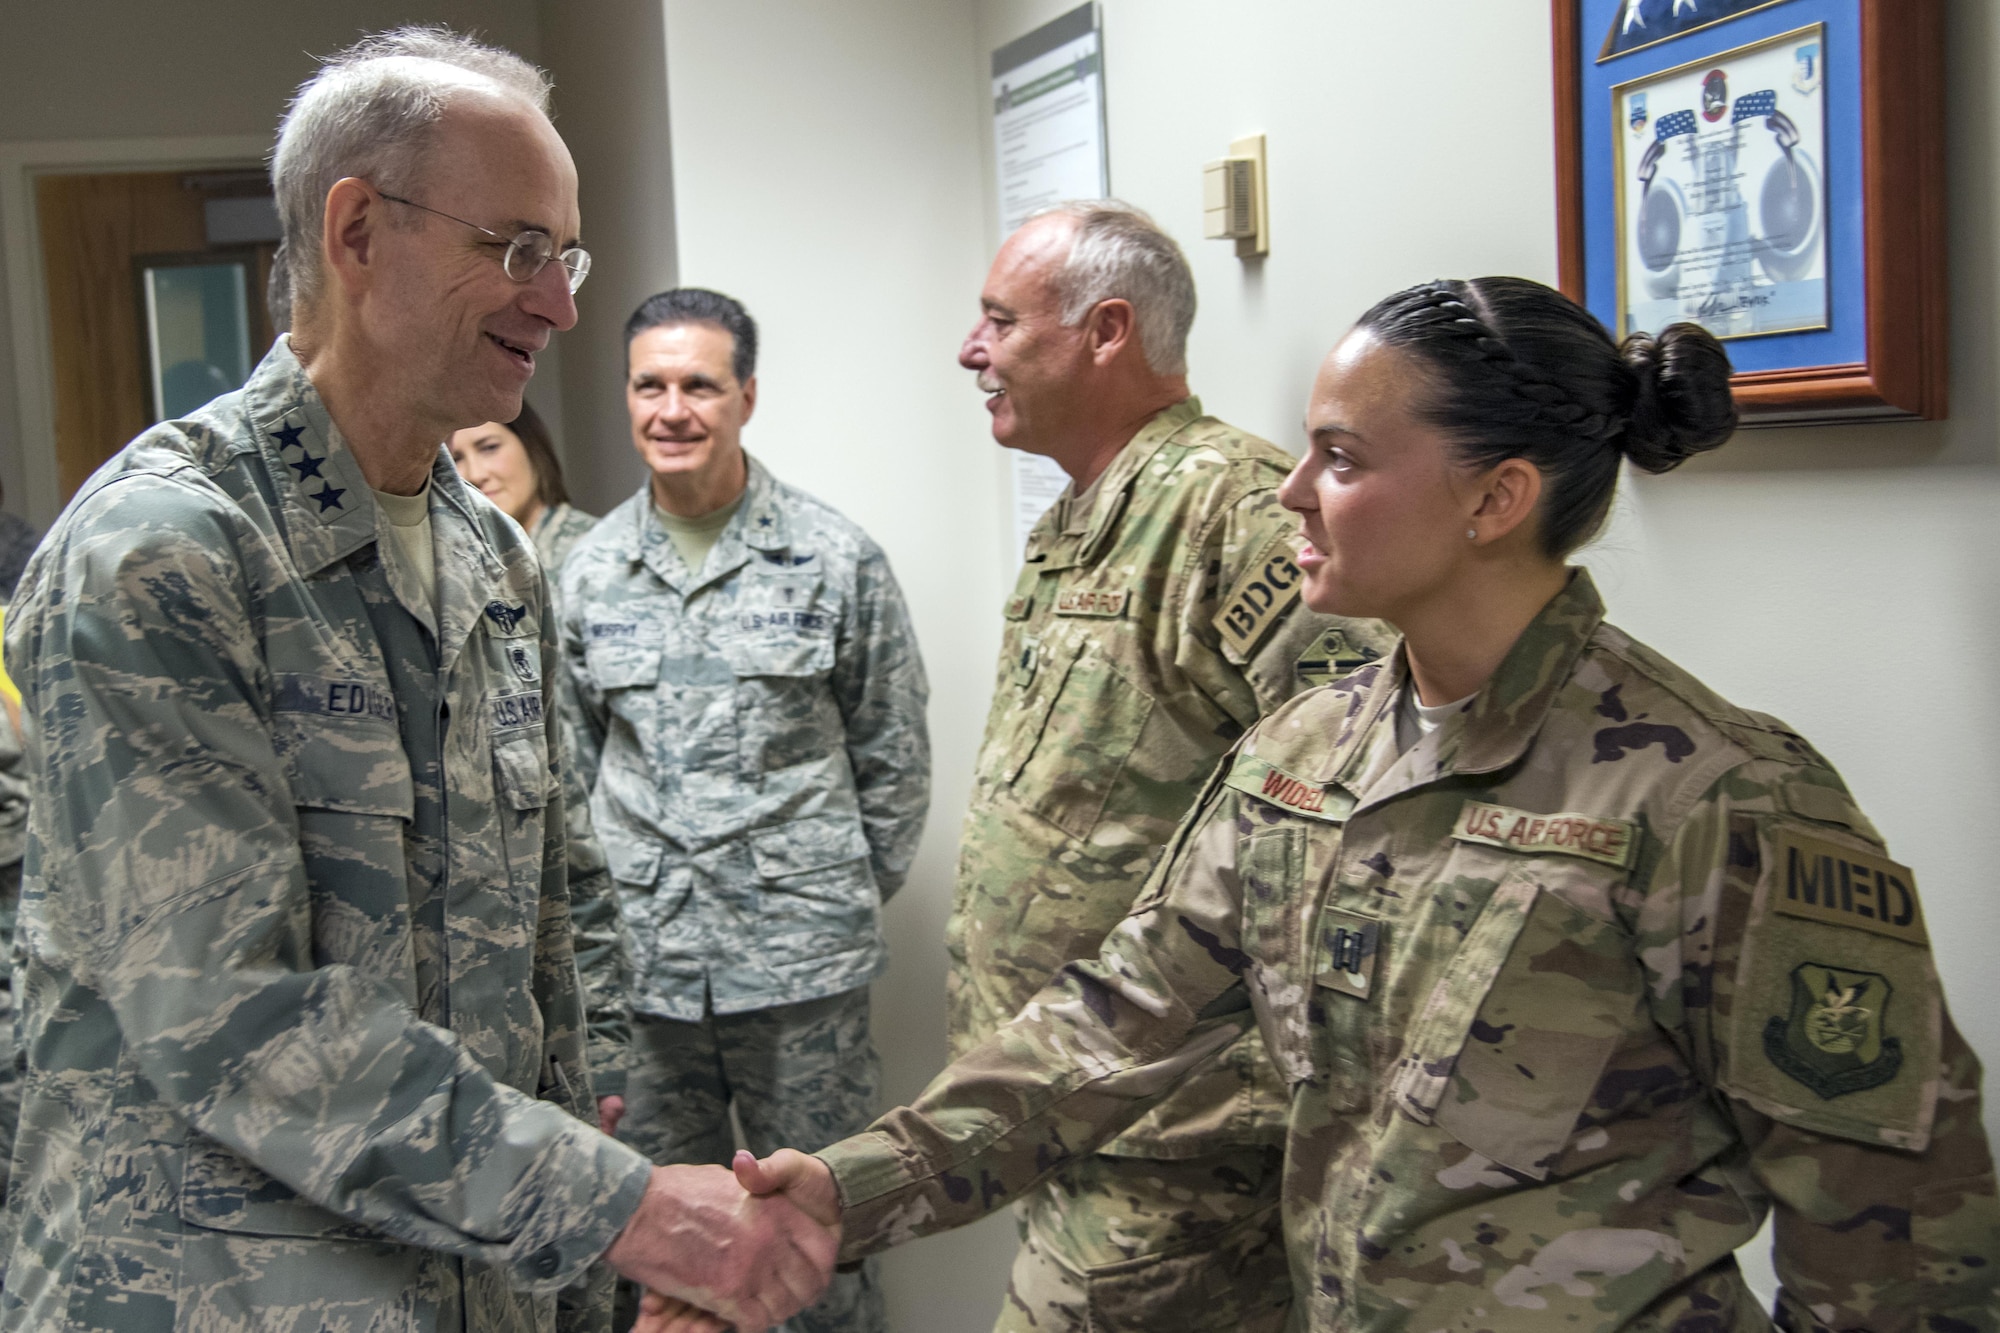 Lt. Gen. Mark Ediger, Surgeon General of the Air Force (AF/SG) shakes hands with Capt. Heather Widdell, 823d Base Defense Squadron medical assistant, Nov.15, 2017, at Moody Air Force Base, Ga. The AF/SG visited Moody to get a better understanding of the 23d Medical Group’s mission. (U.S. Air Force photo by Airman Eugene Oliver)